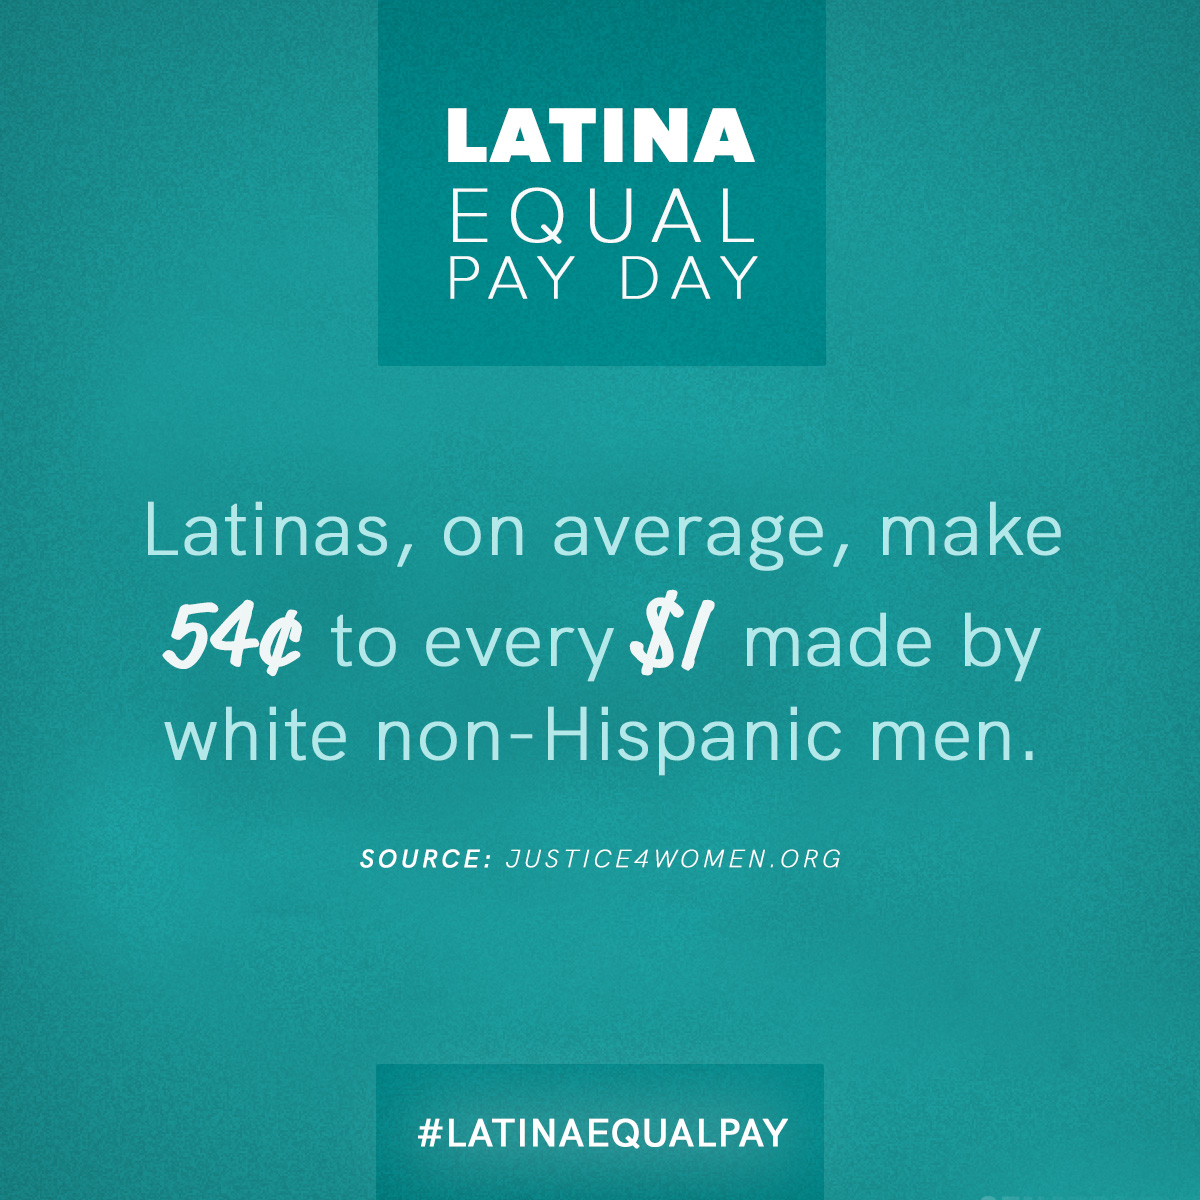 As the first and only Latina in the U.S. Senate, I’ll always use my seat at the table to fight for equal pay for equal work. On #LatinaEqualPayDay, I’m reaffirming my commitment to closing the pay gap and passing the Paycheck Fairness Act.